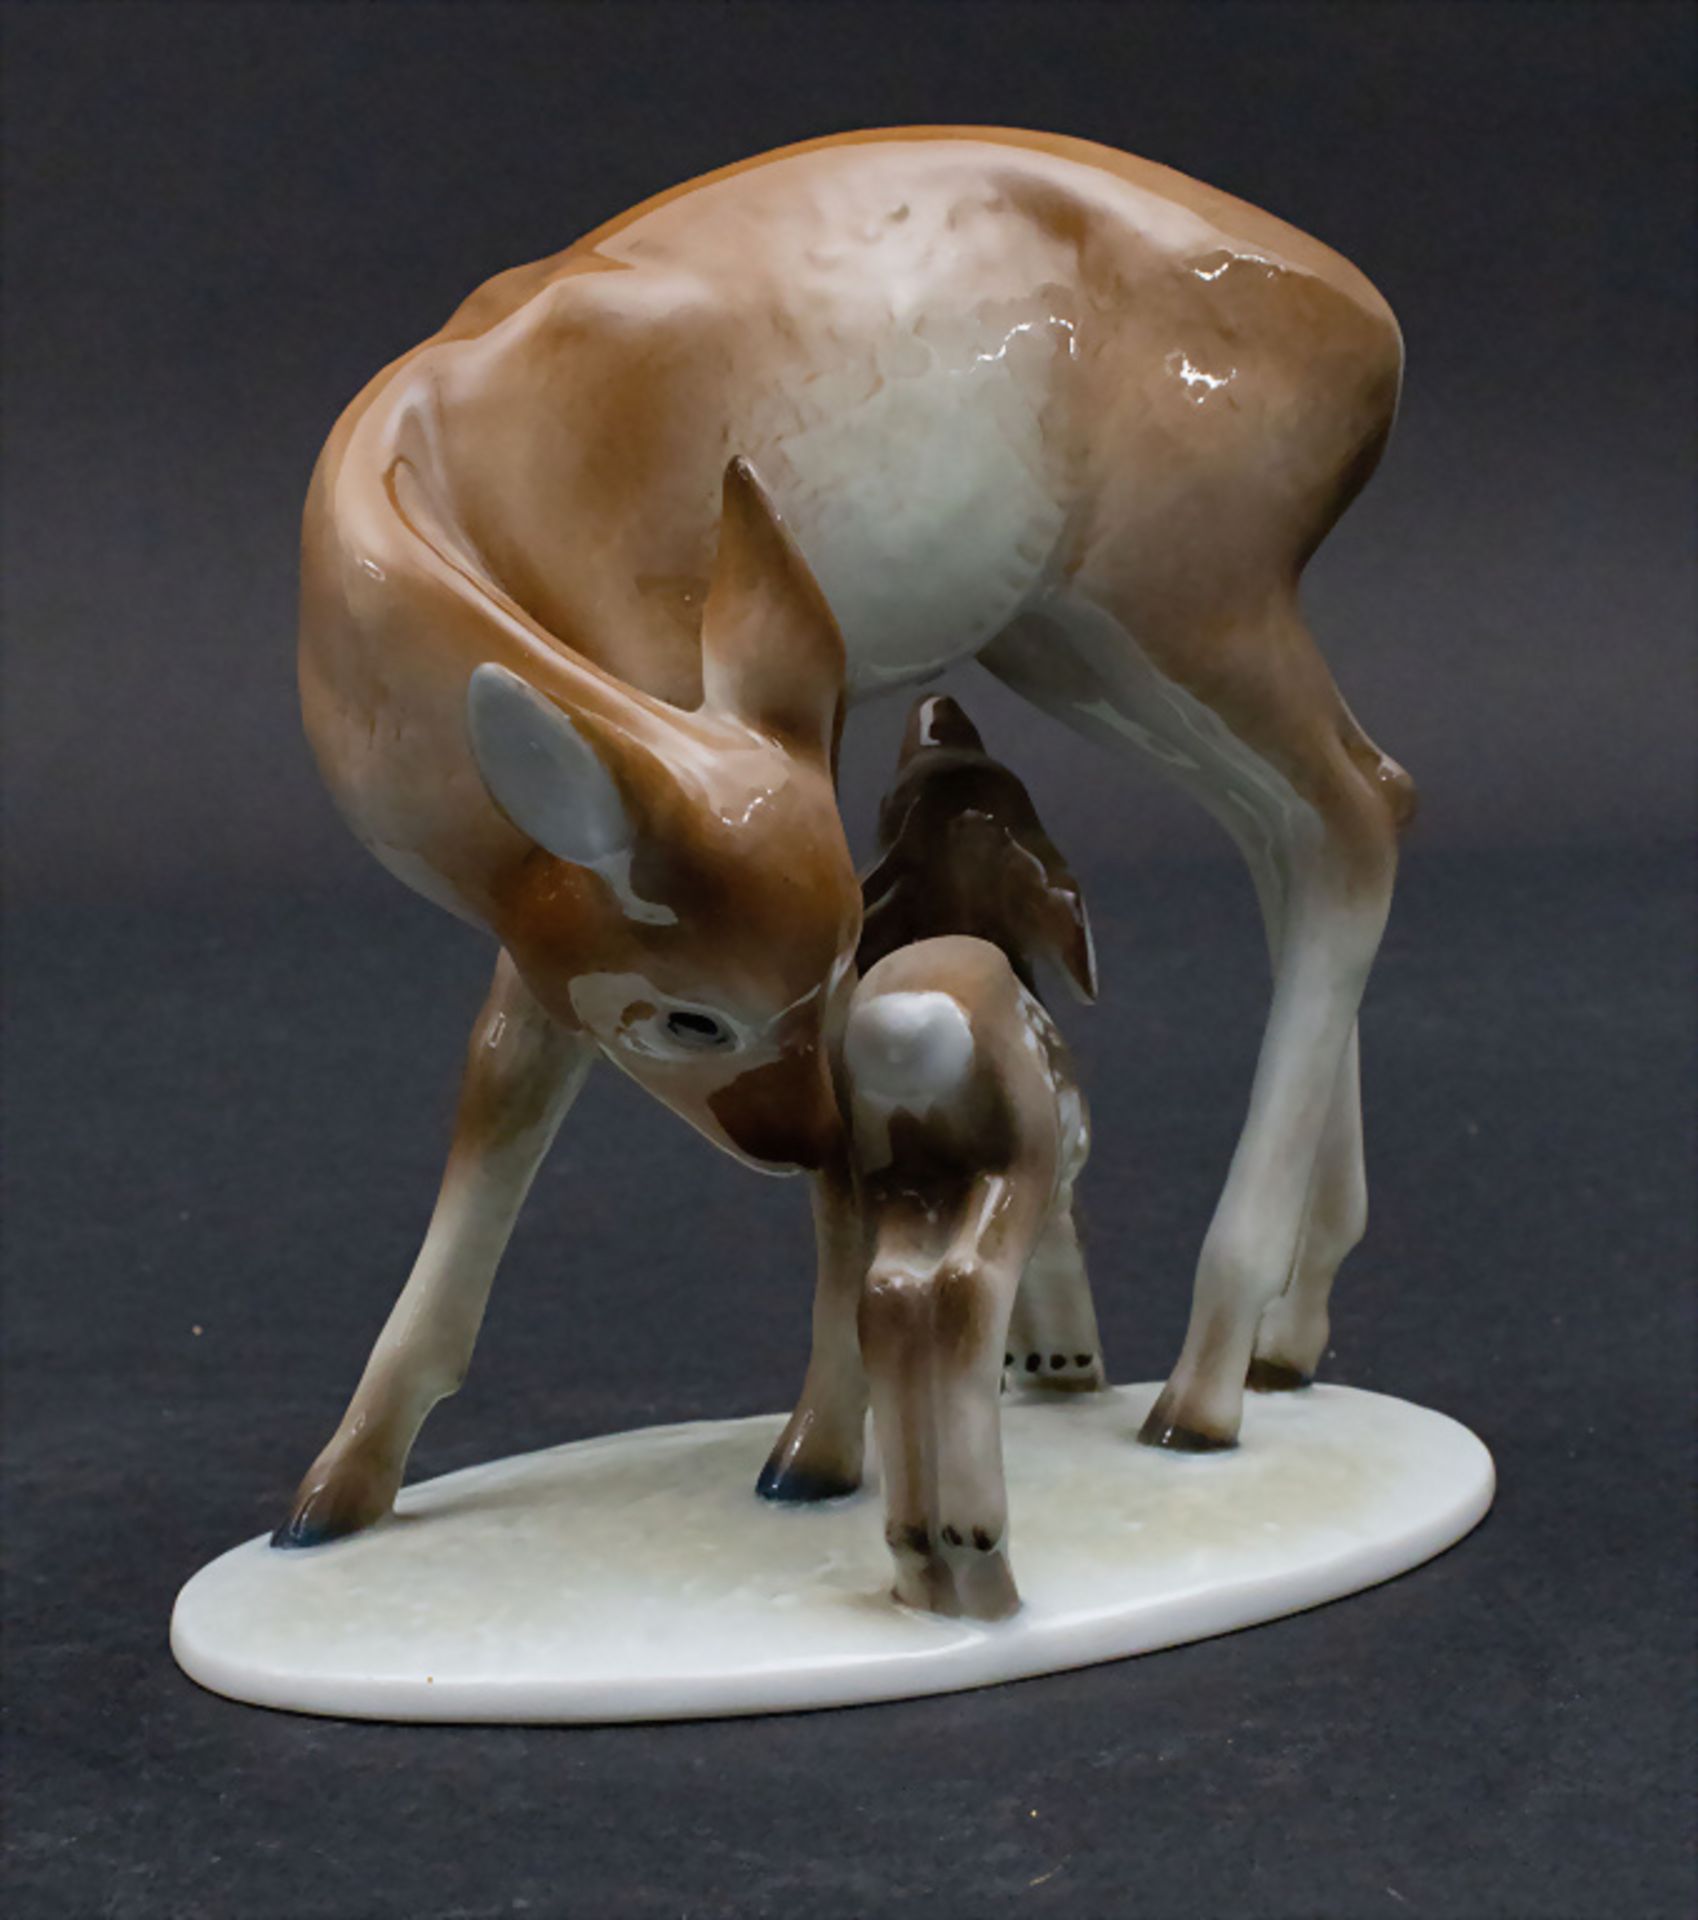 Reh mit Rehkitz / A deer with a fawn, Rudolf Rempel, Rosenthal, Selb, um 1937 - Image 2 of 7